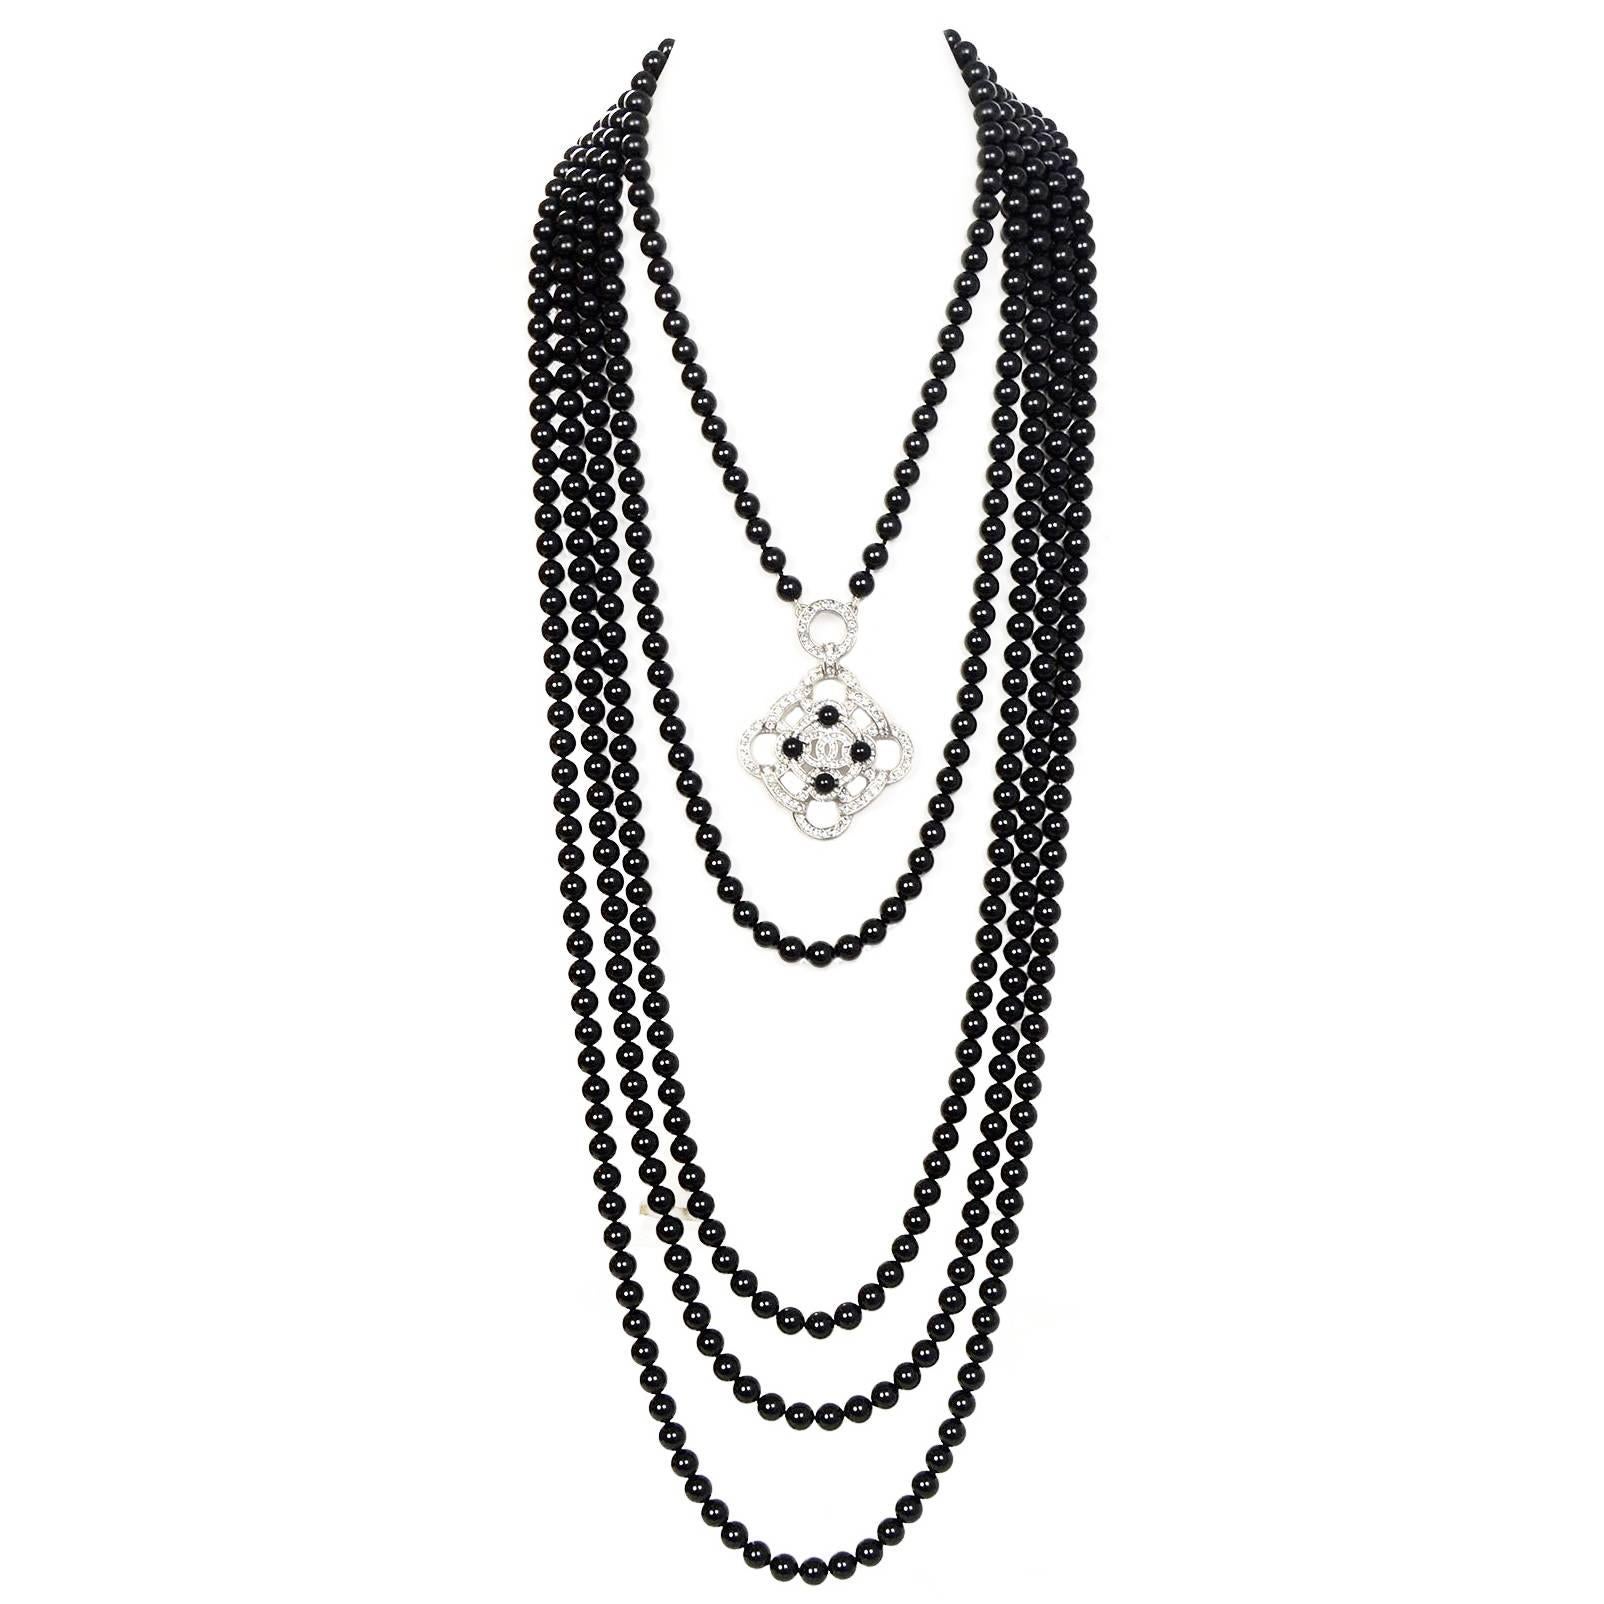 100% Authetic Chanel 2016 Black Beaded Necklace.  Features 5 strands of black glass beads at different lengths complimented by a clear crystal camelia pendant with black bead detail and CC logo.

Made In: Italy
Year of Production: 2016
Color: